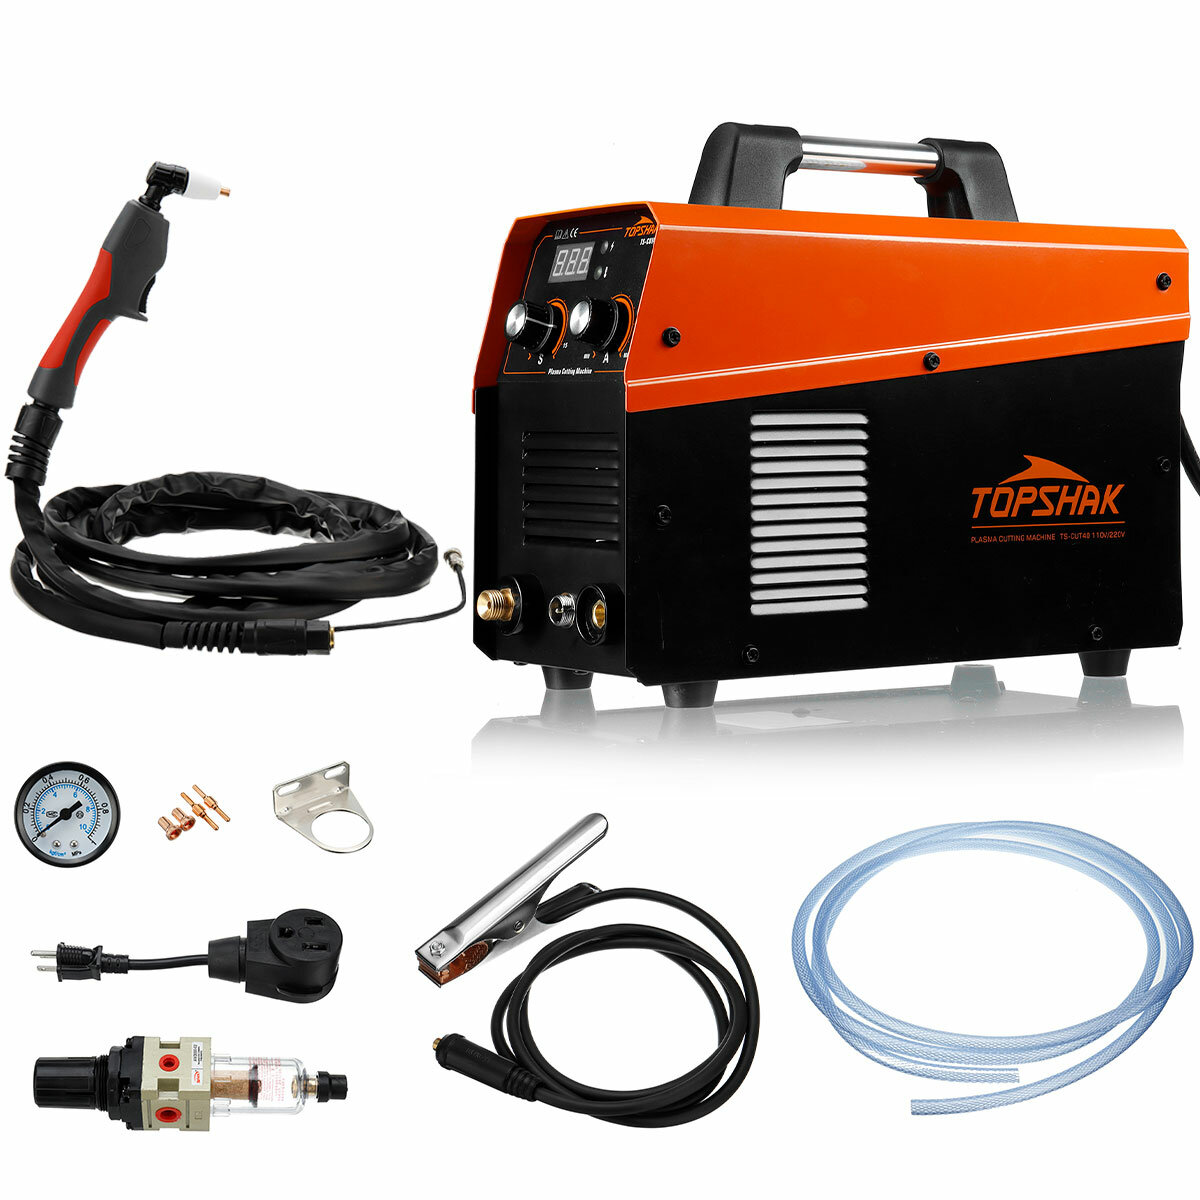 Image of Topshak TS-CUT40 40A Plasma Cutter 110V/220V Dual Voltage AC DC IGBT Cutting Welding Machine Welder with LCD Display